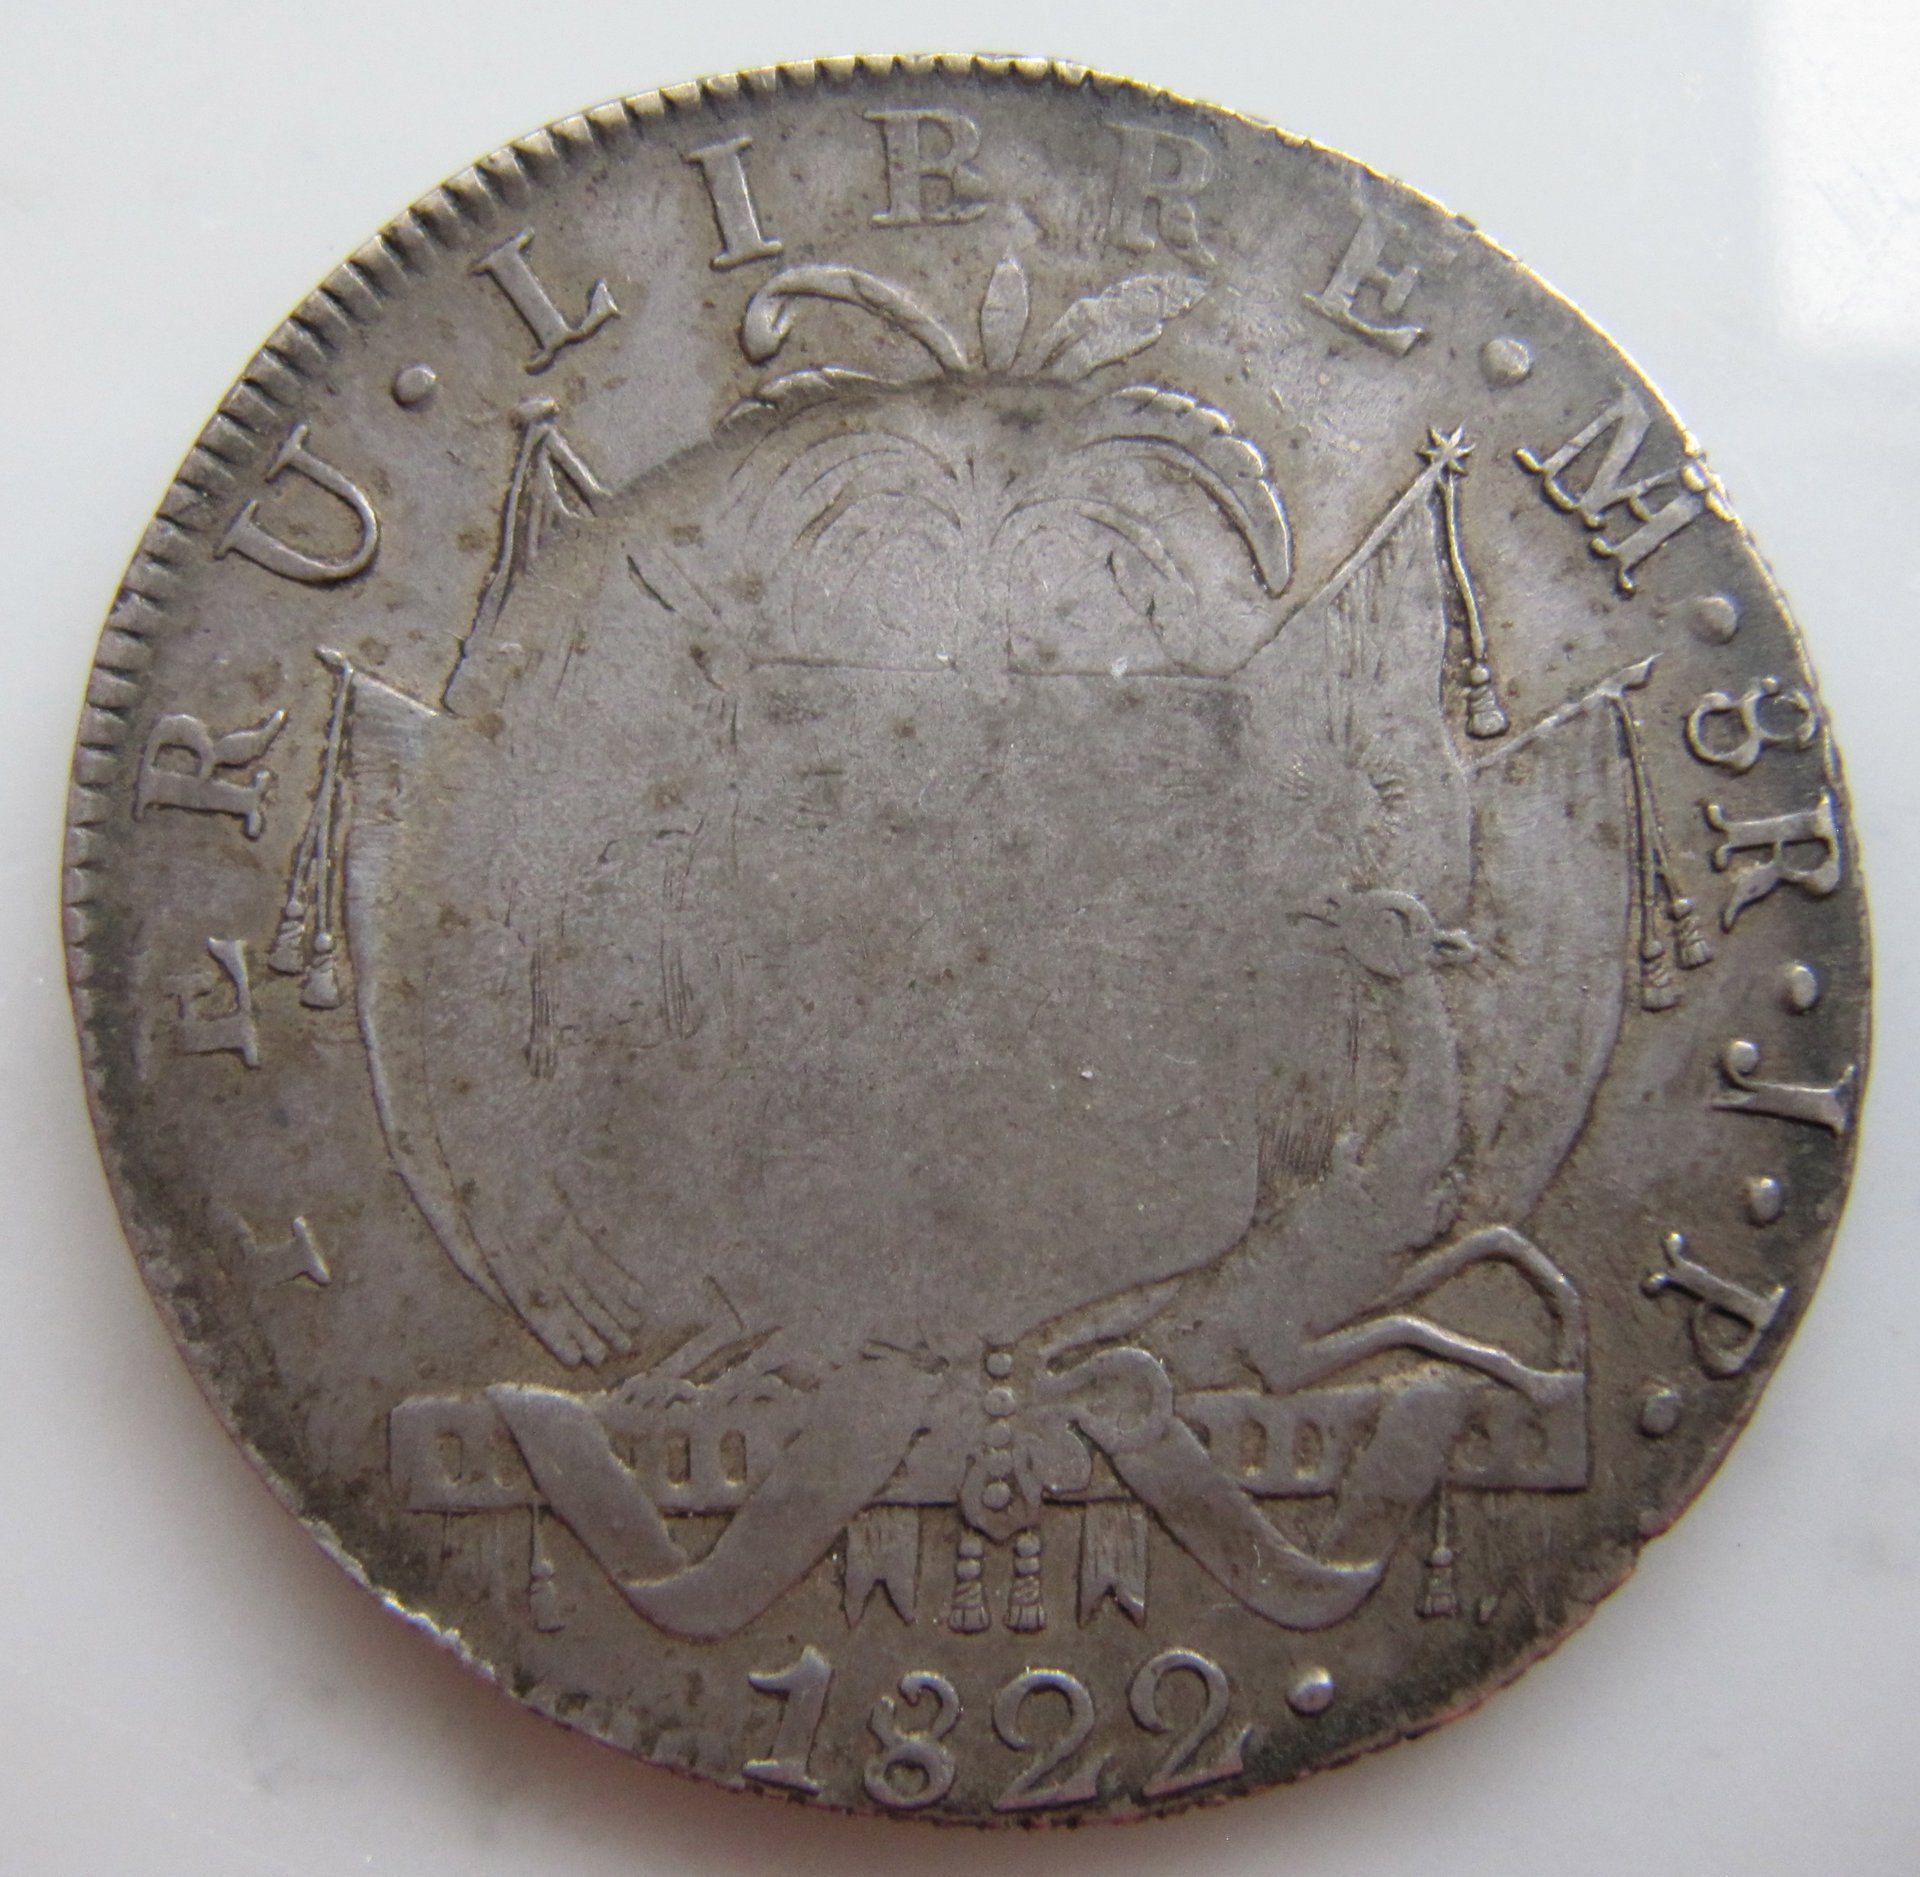 Peru Libre 8 Reales 1822 with counterstamp - OBV - 1.jpg